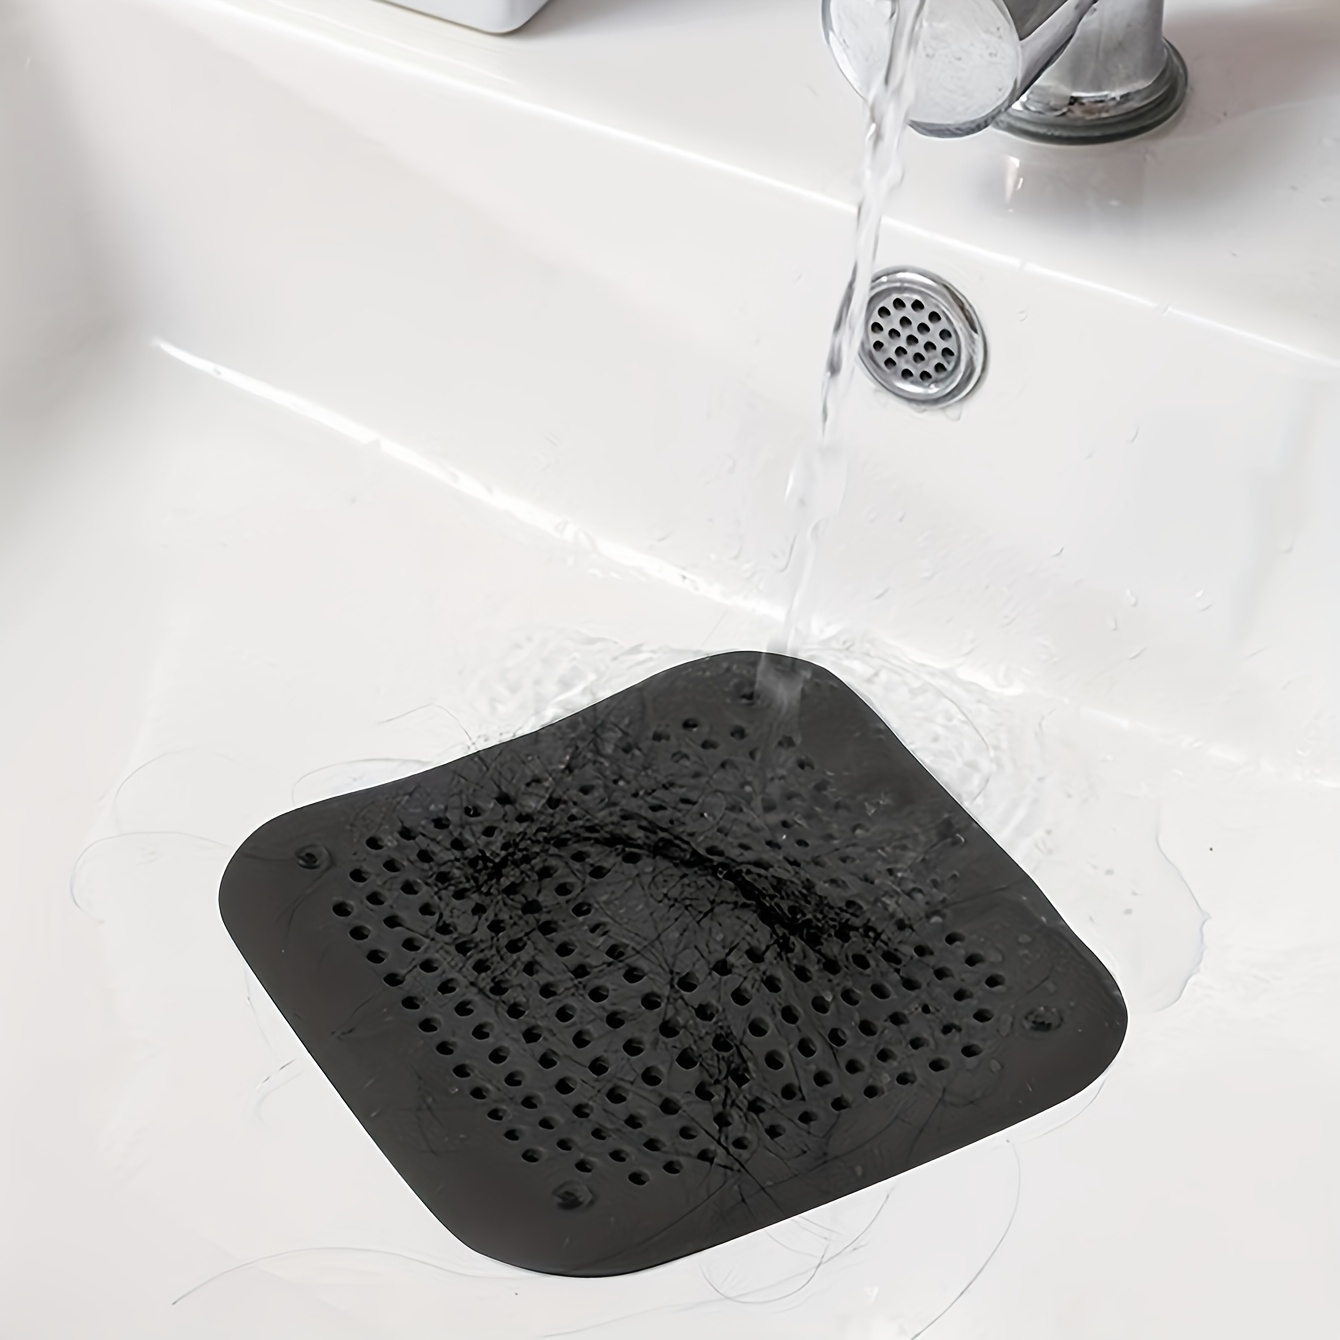 Dropship Square Hair Drain Cover For Filter Shower; Drain Protection Flat Strainer  Stopper With 4 Suction Cups; Sink Drain For Bathroom to Sell Online at a  Lower Price